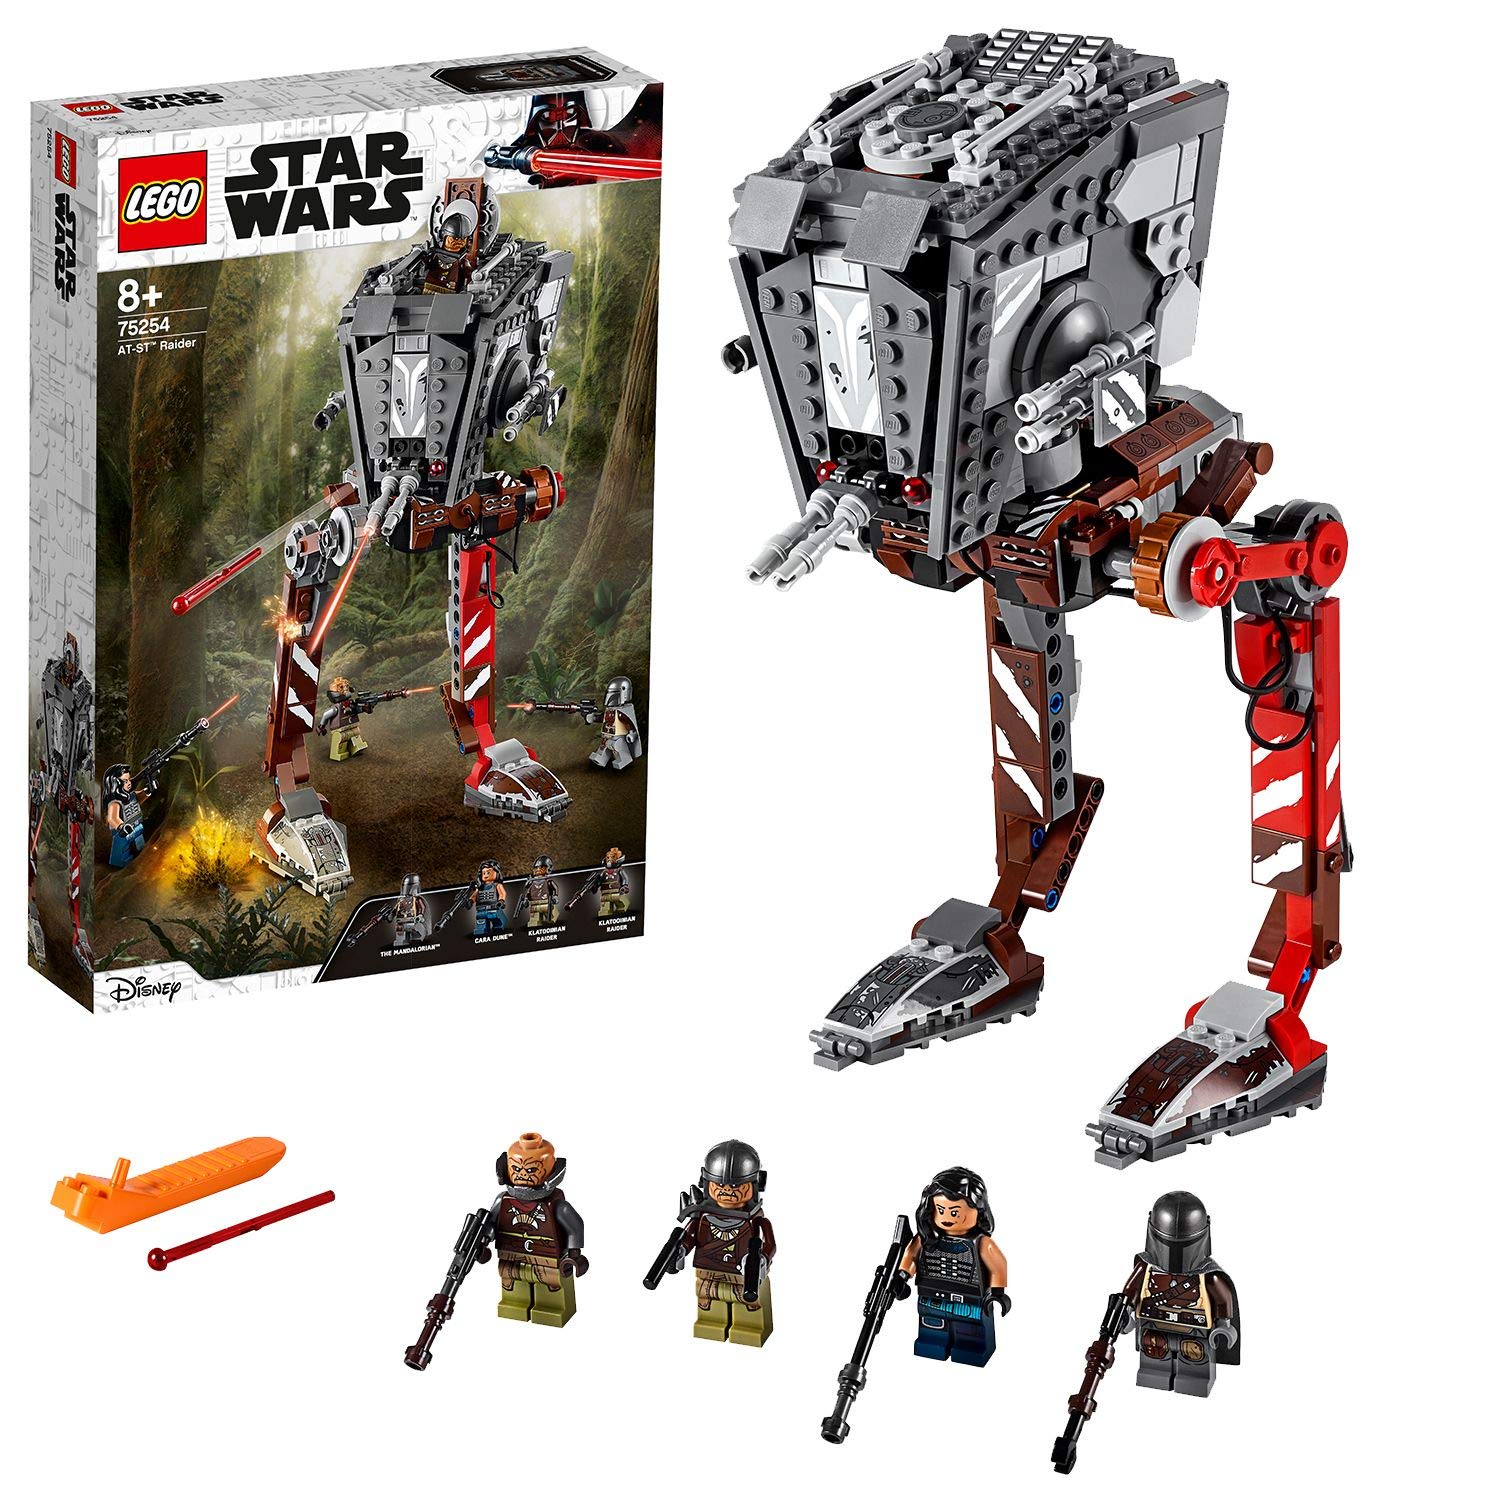 LEGO Star Wars 75254 CONF_CORE9_Ep9 V29 Product Title Missing, Multi-Colour